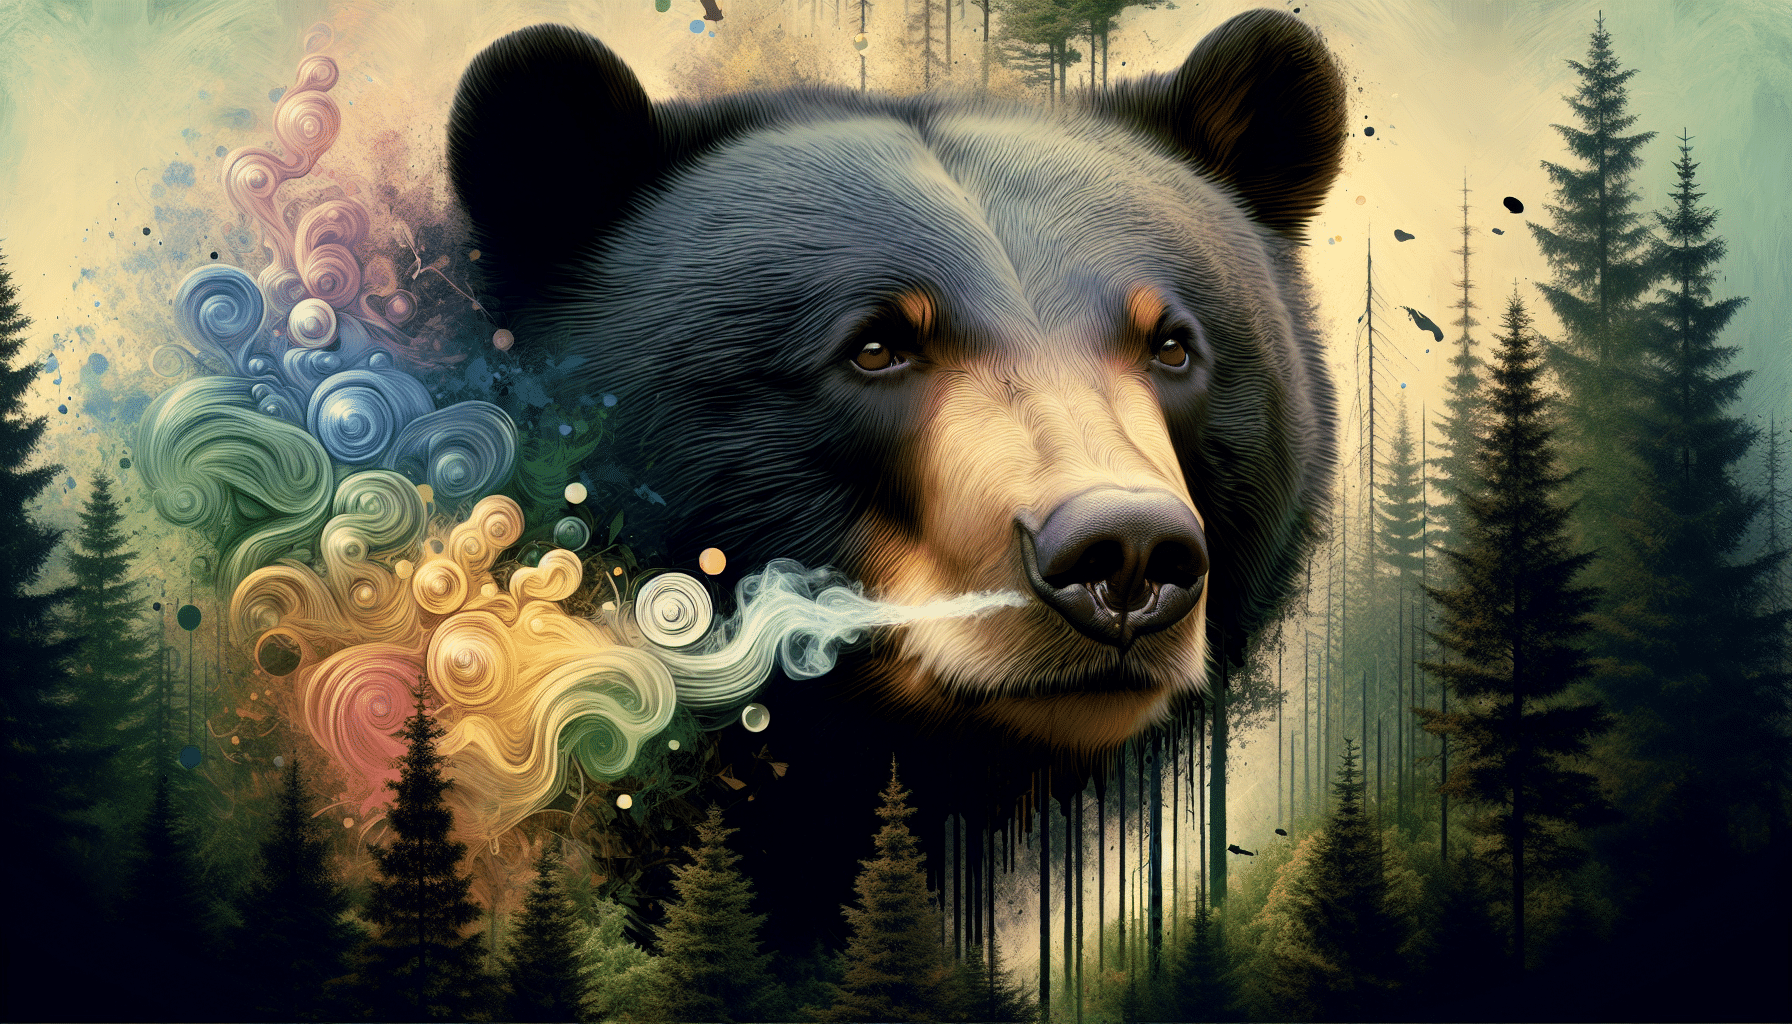 A close-up, richly detailed image of a black bear in its natural forest habitat. The bear is sniffing the air, its eyes half-closed as if savoring a scent. The forest around the bear is lush and thick, with tall pine trees and a carpet of fallen leaves. There should also be a representation of floating aroma around the bear not tied to any particular object, represented as faint, abstract, coloured wisps to symbolize various smells. The colours of the wisps are muted and harmonize with the forest tones. No people, brand names, or logos are present in the image.